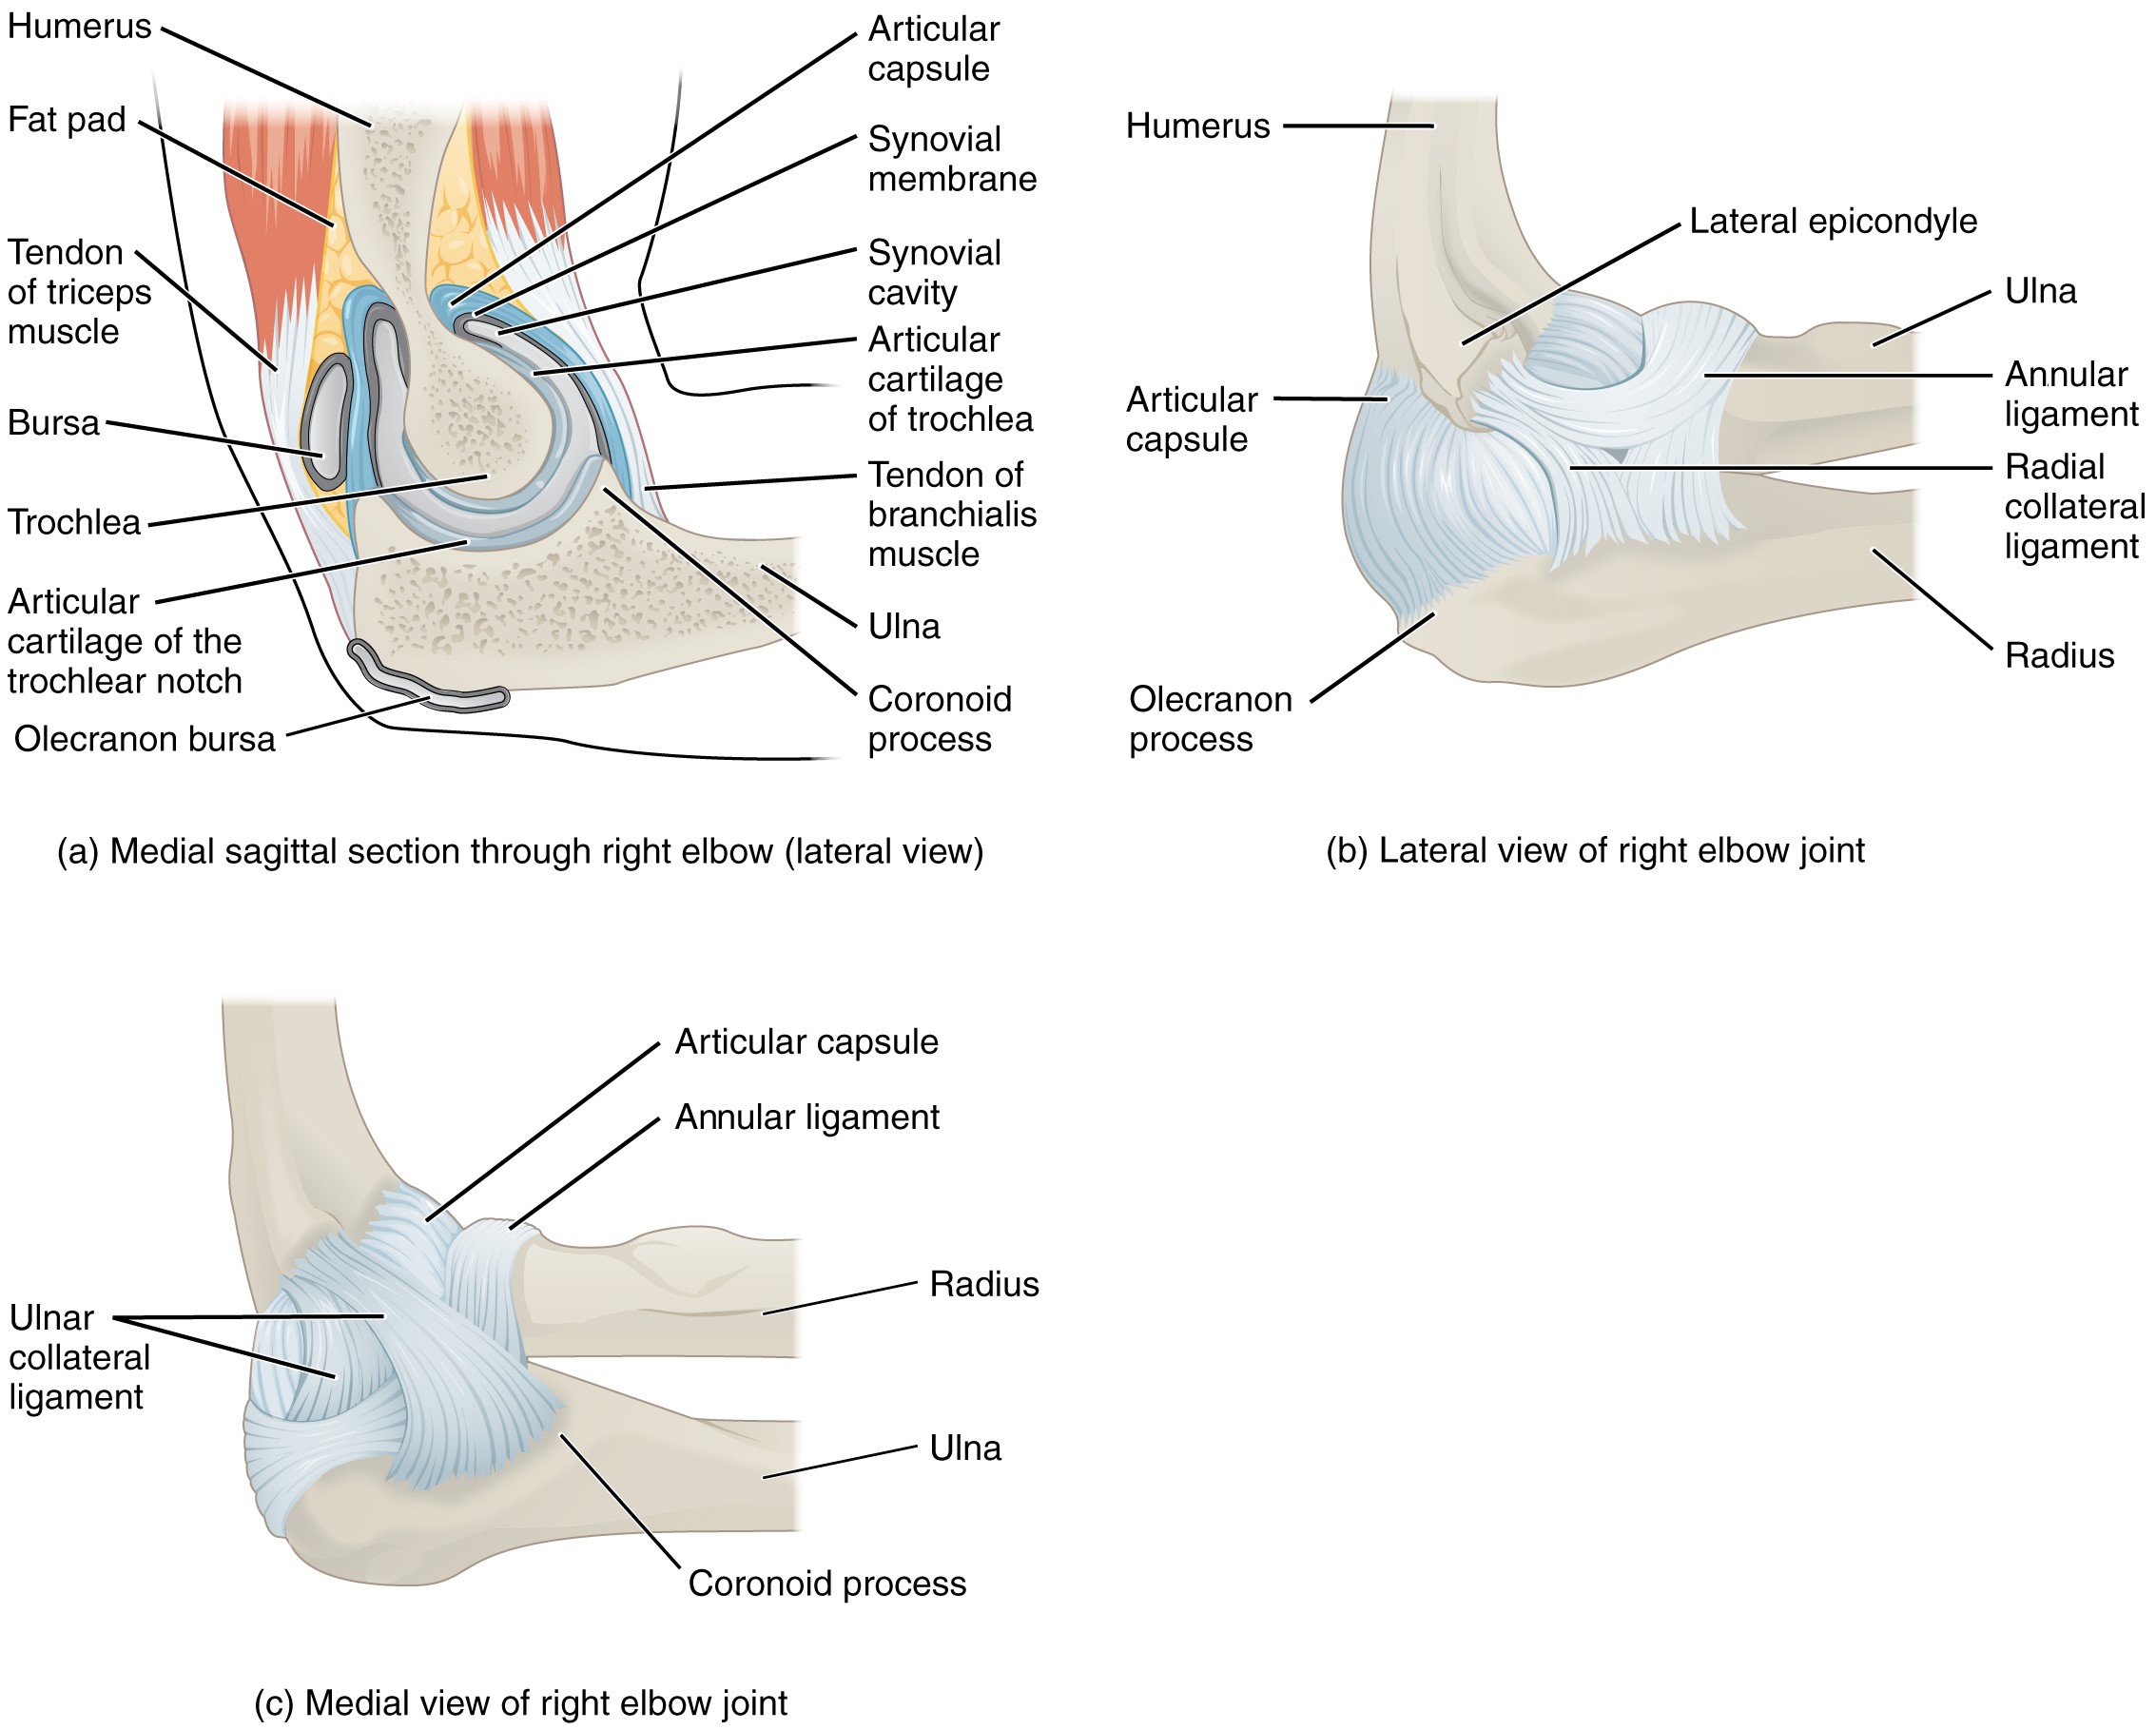 Sagittal view of right elbow joint; Superficial medial and lateral views showing ligaments of the right elbow joint